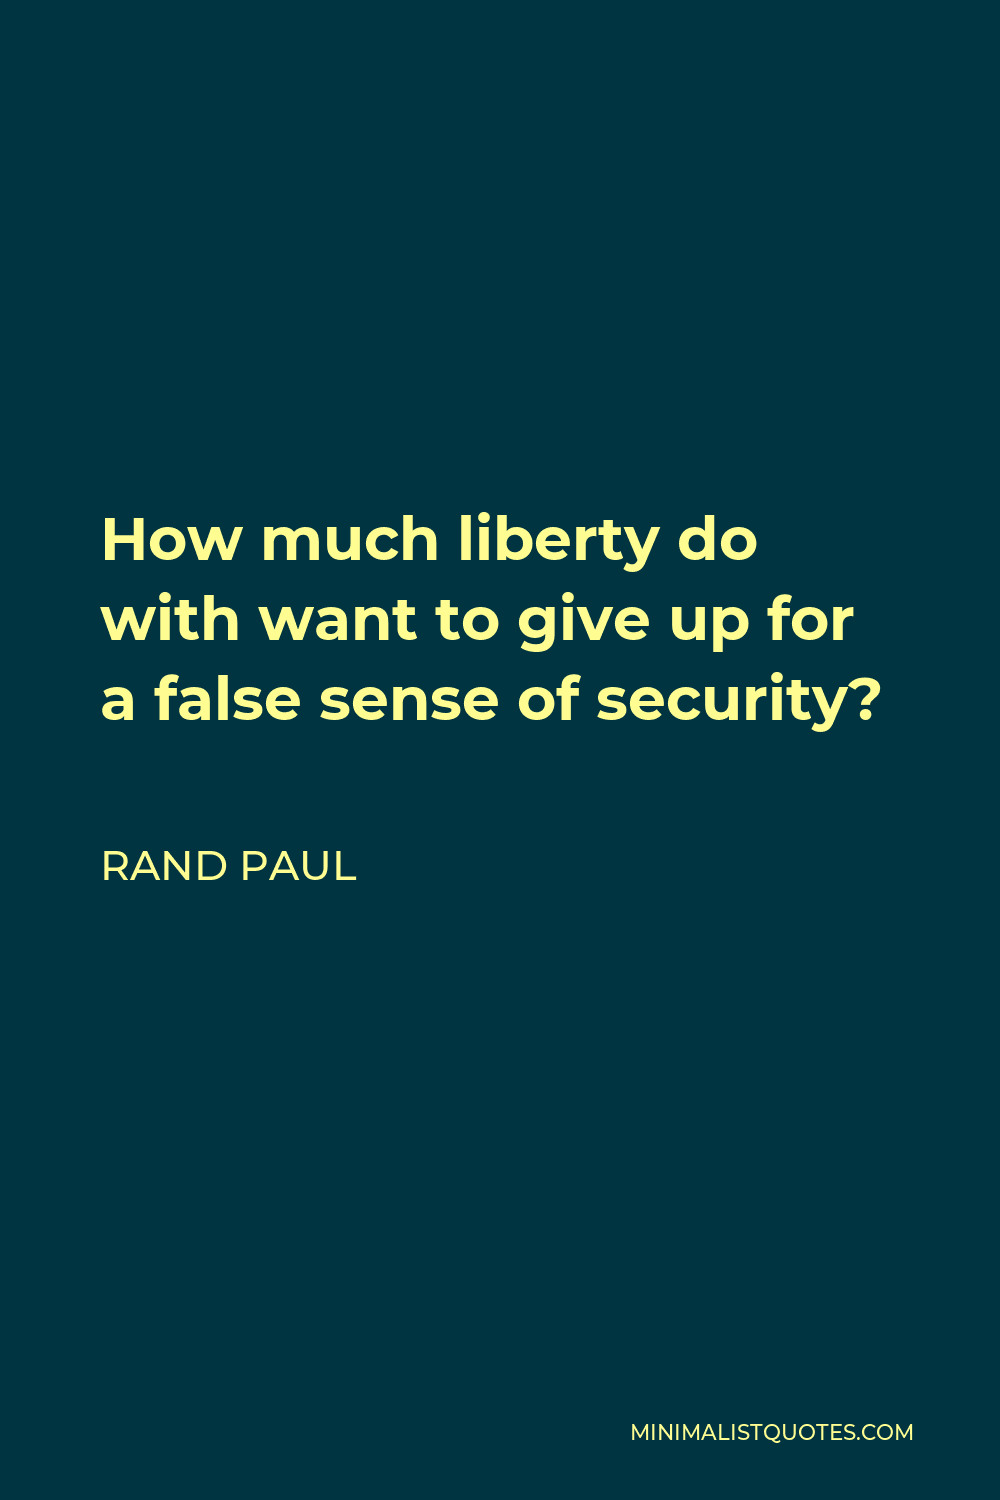 Rand Paul Quote - How much liberty do with want to give up for a false sense of security?